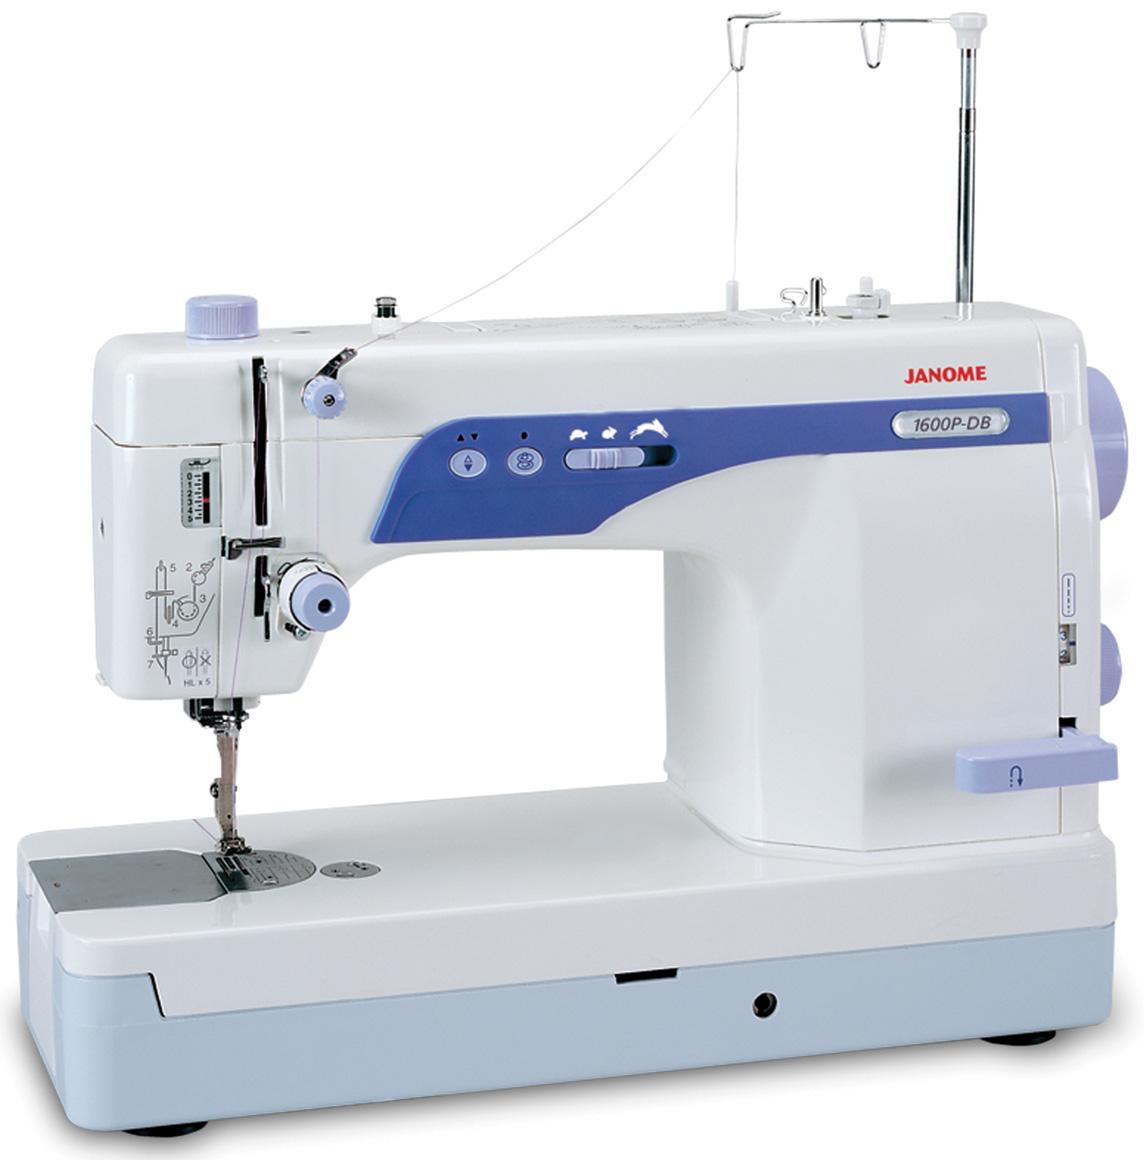 Best JANOME Sewing Machine for Quilting - Janome 1600p –